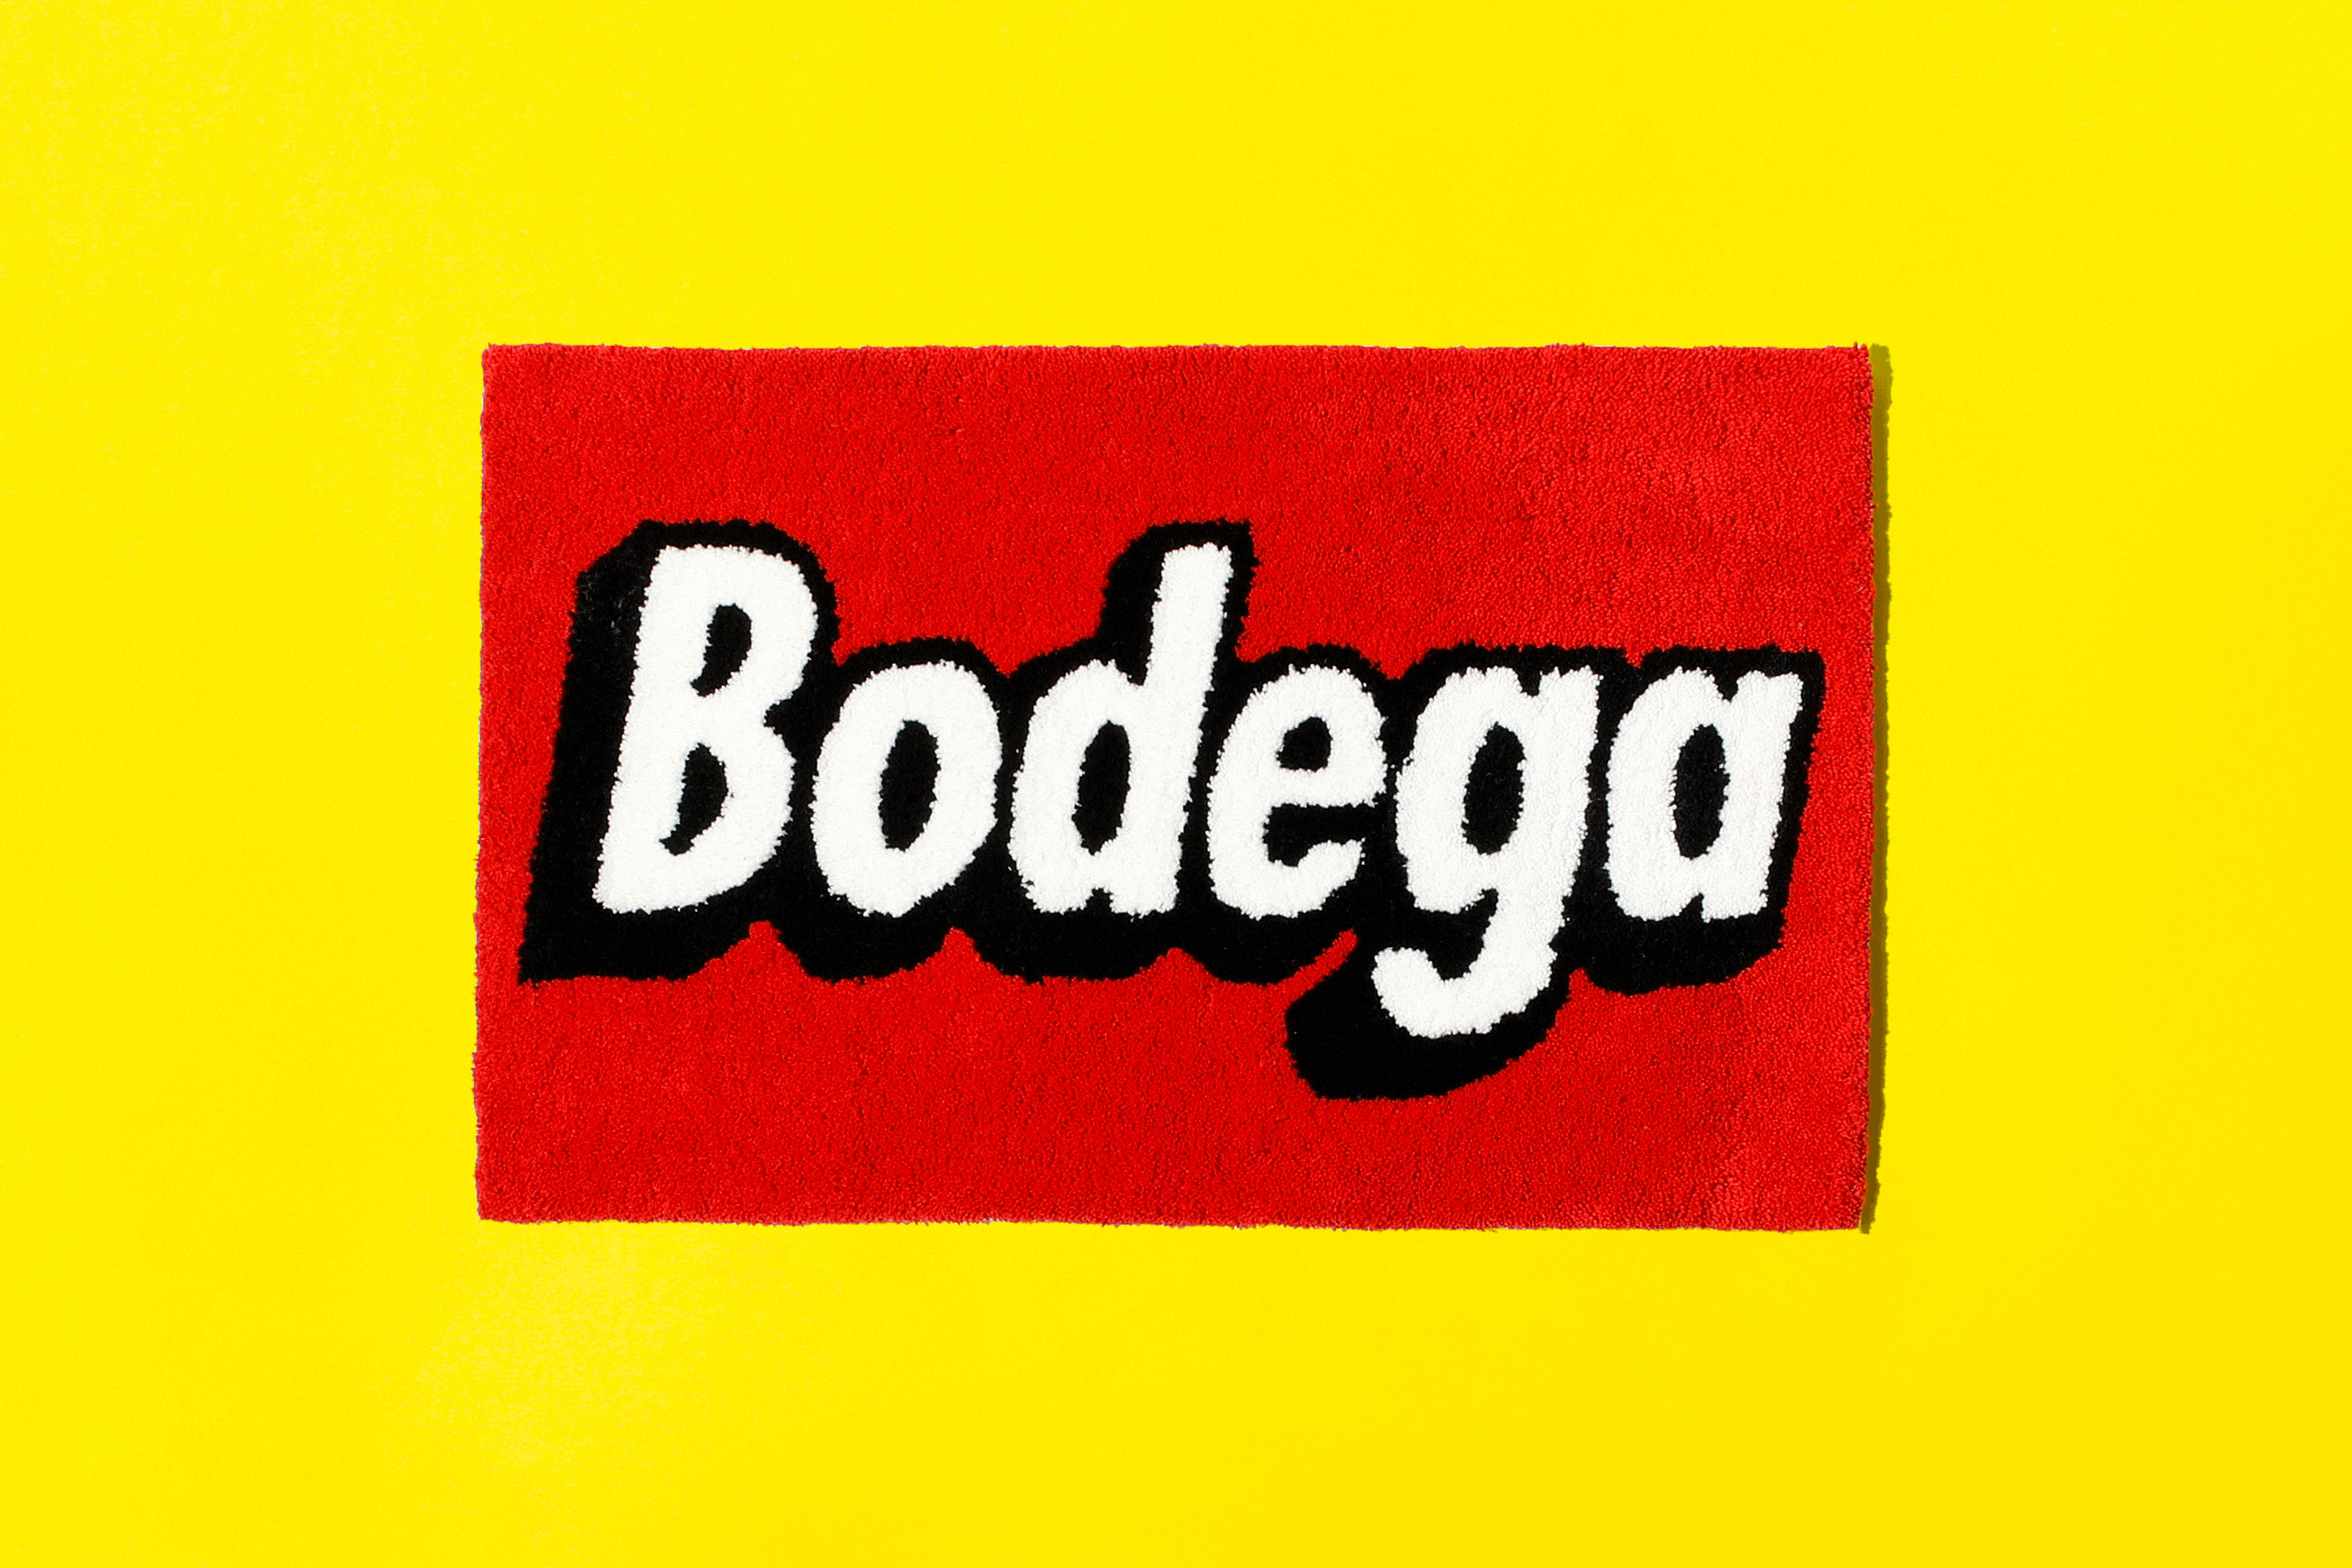 Bodega x F@brick Slide collaborations collabs innersect